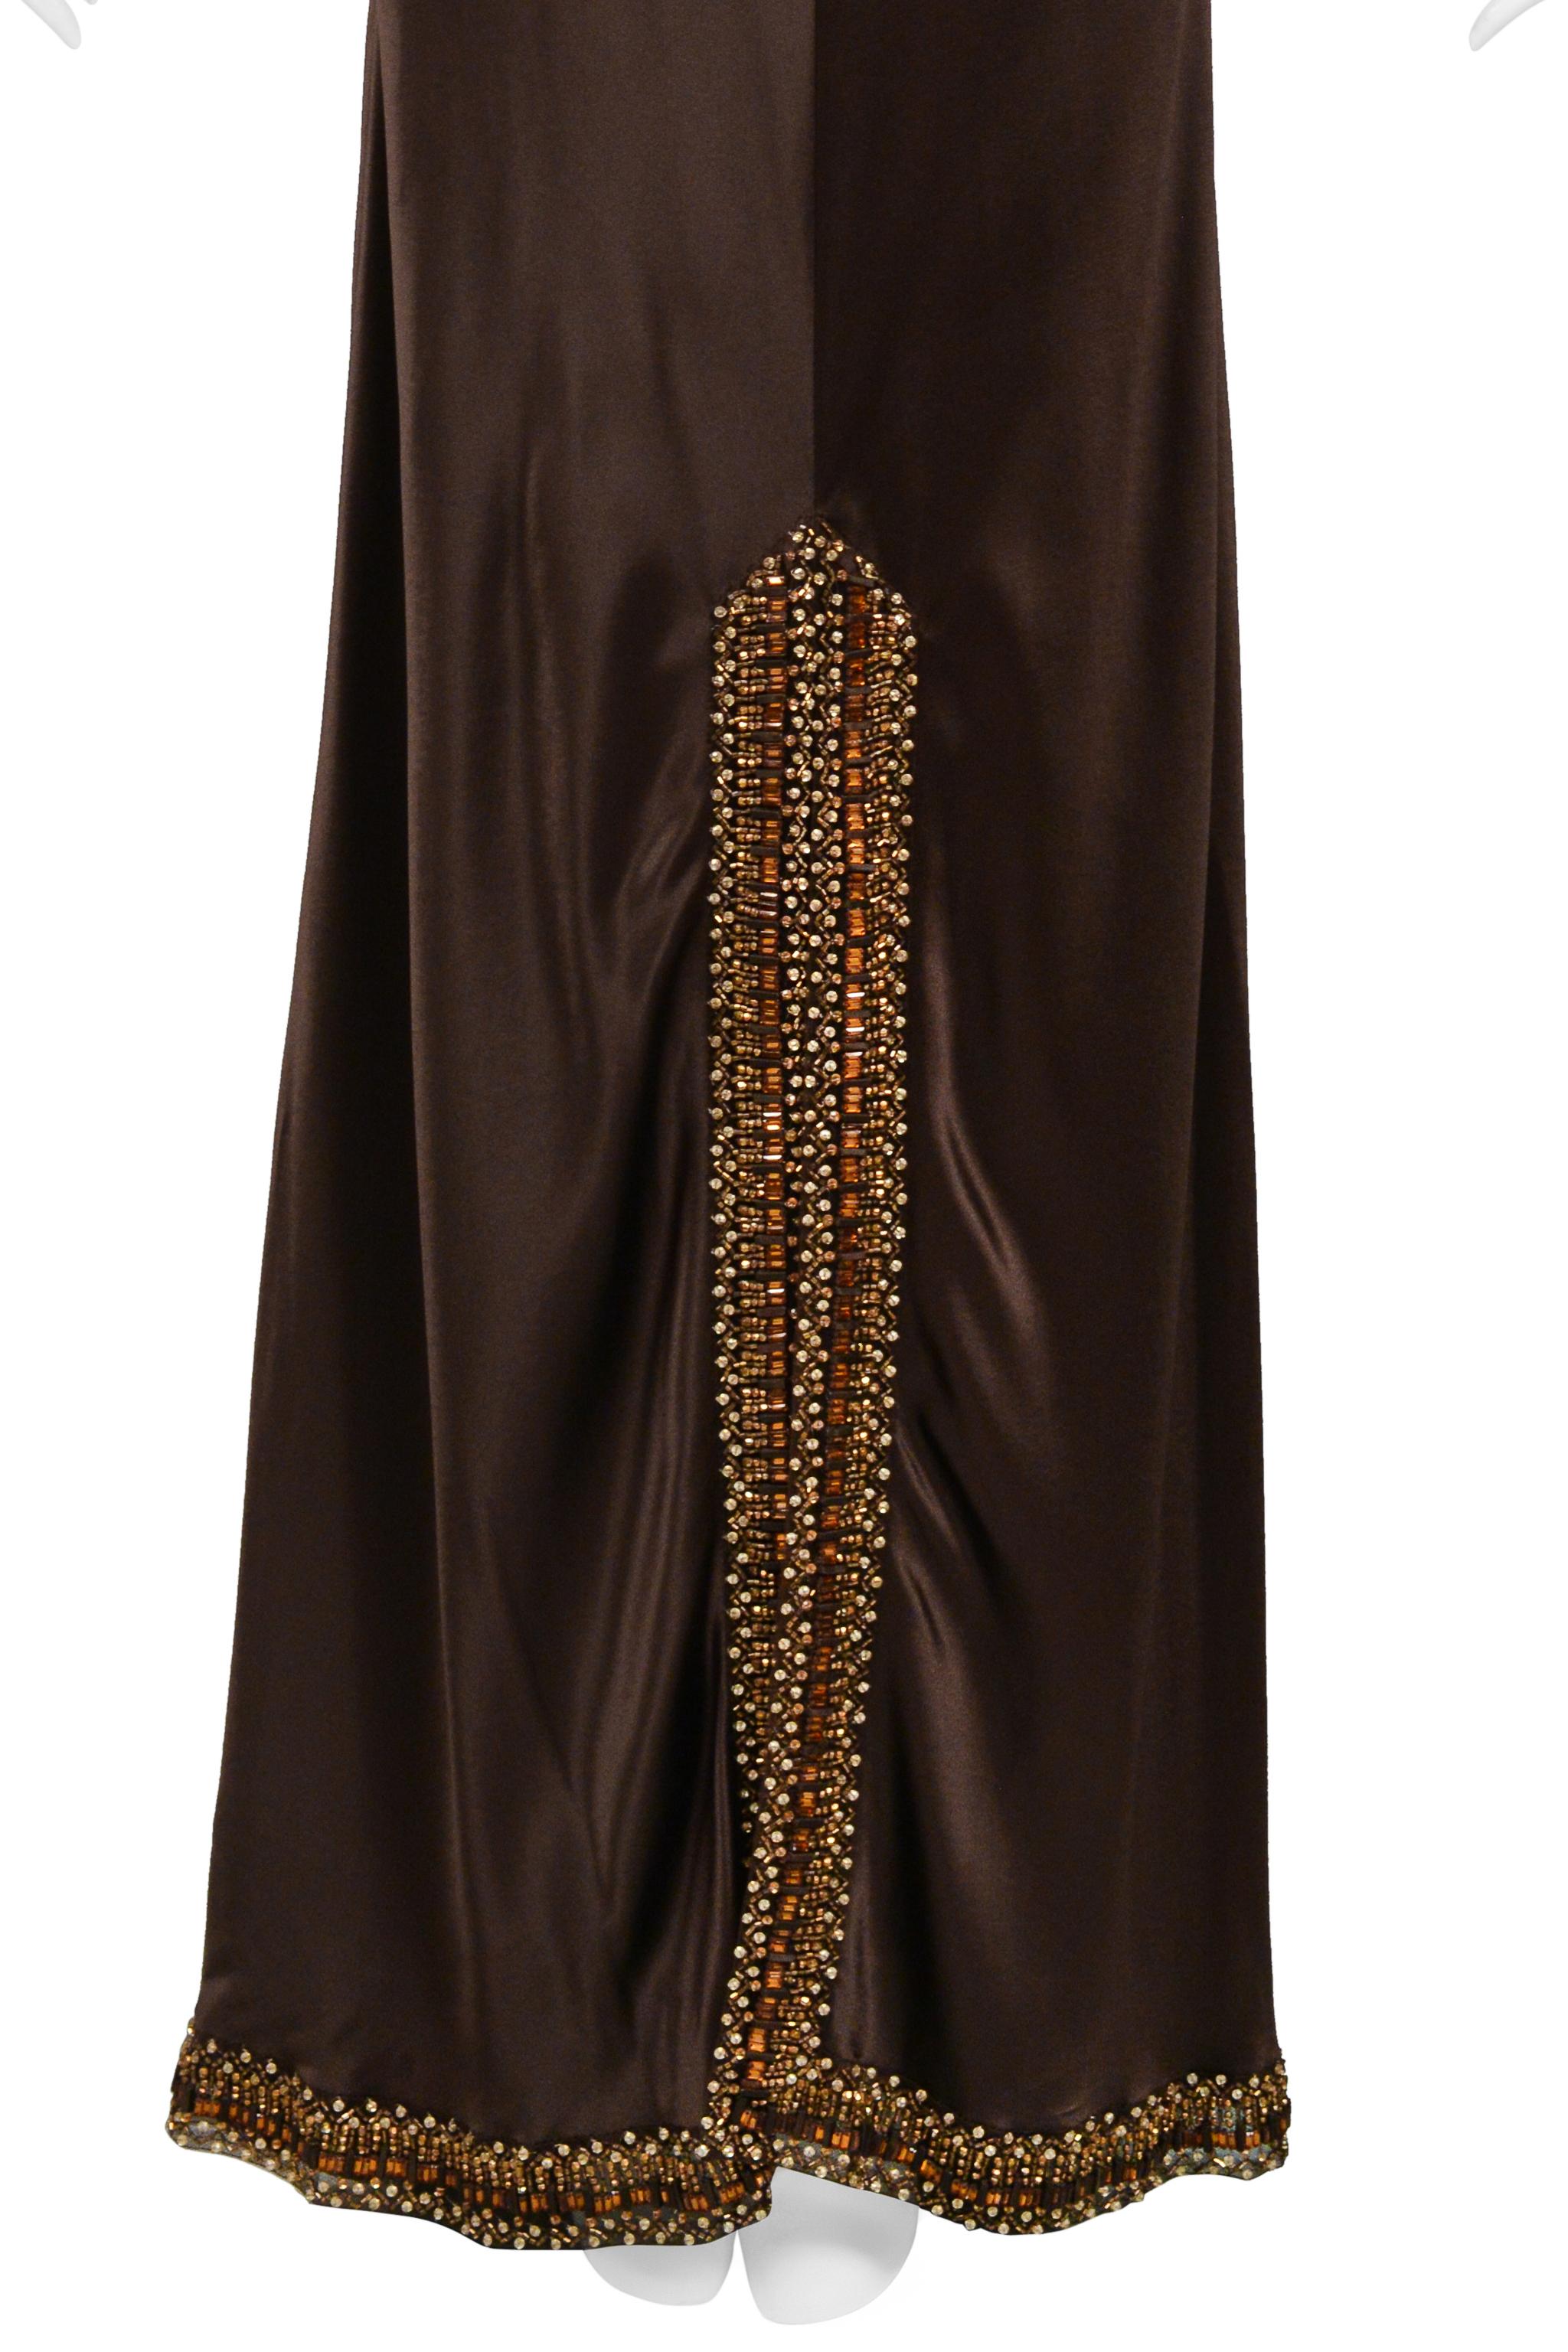 Valentino Brown Silk Evening Gown With Jacket AW 2006-07 For Sale 5